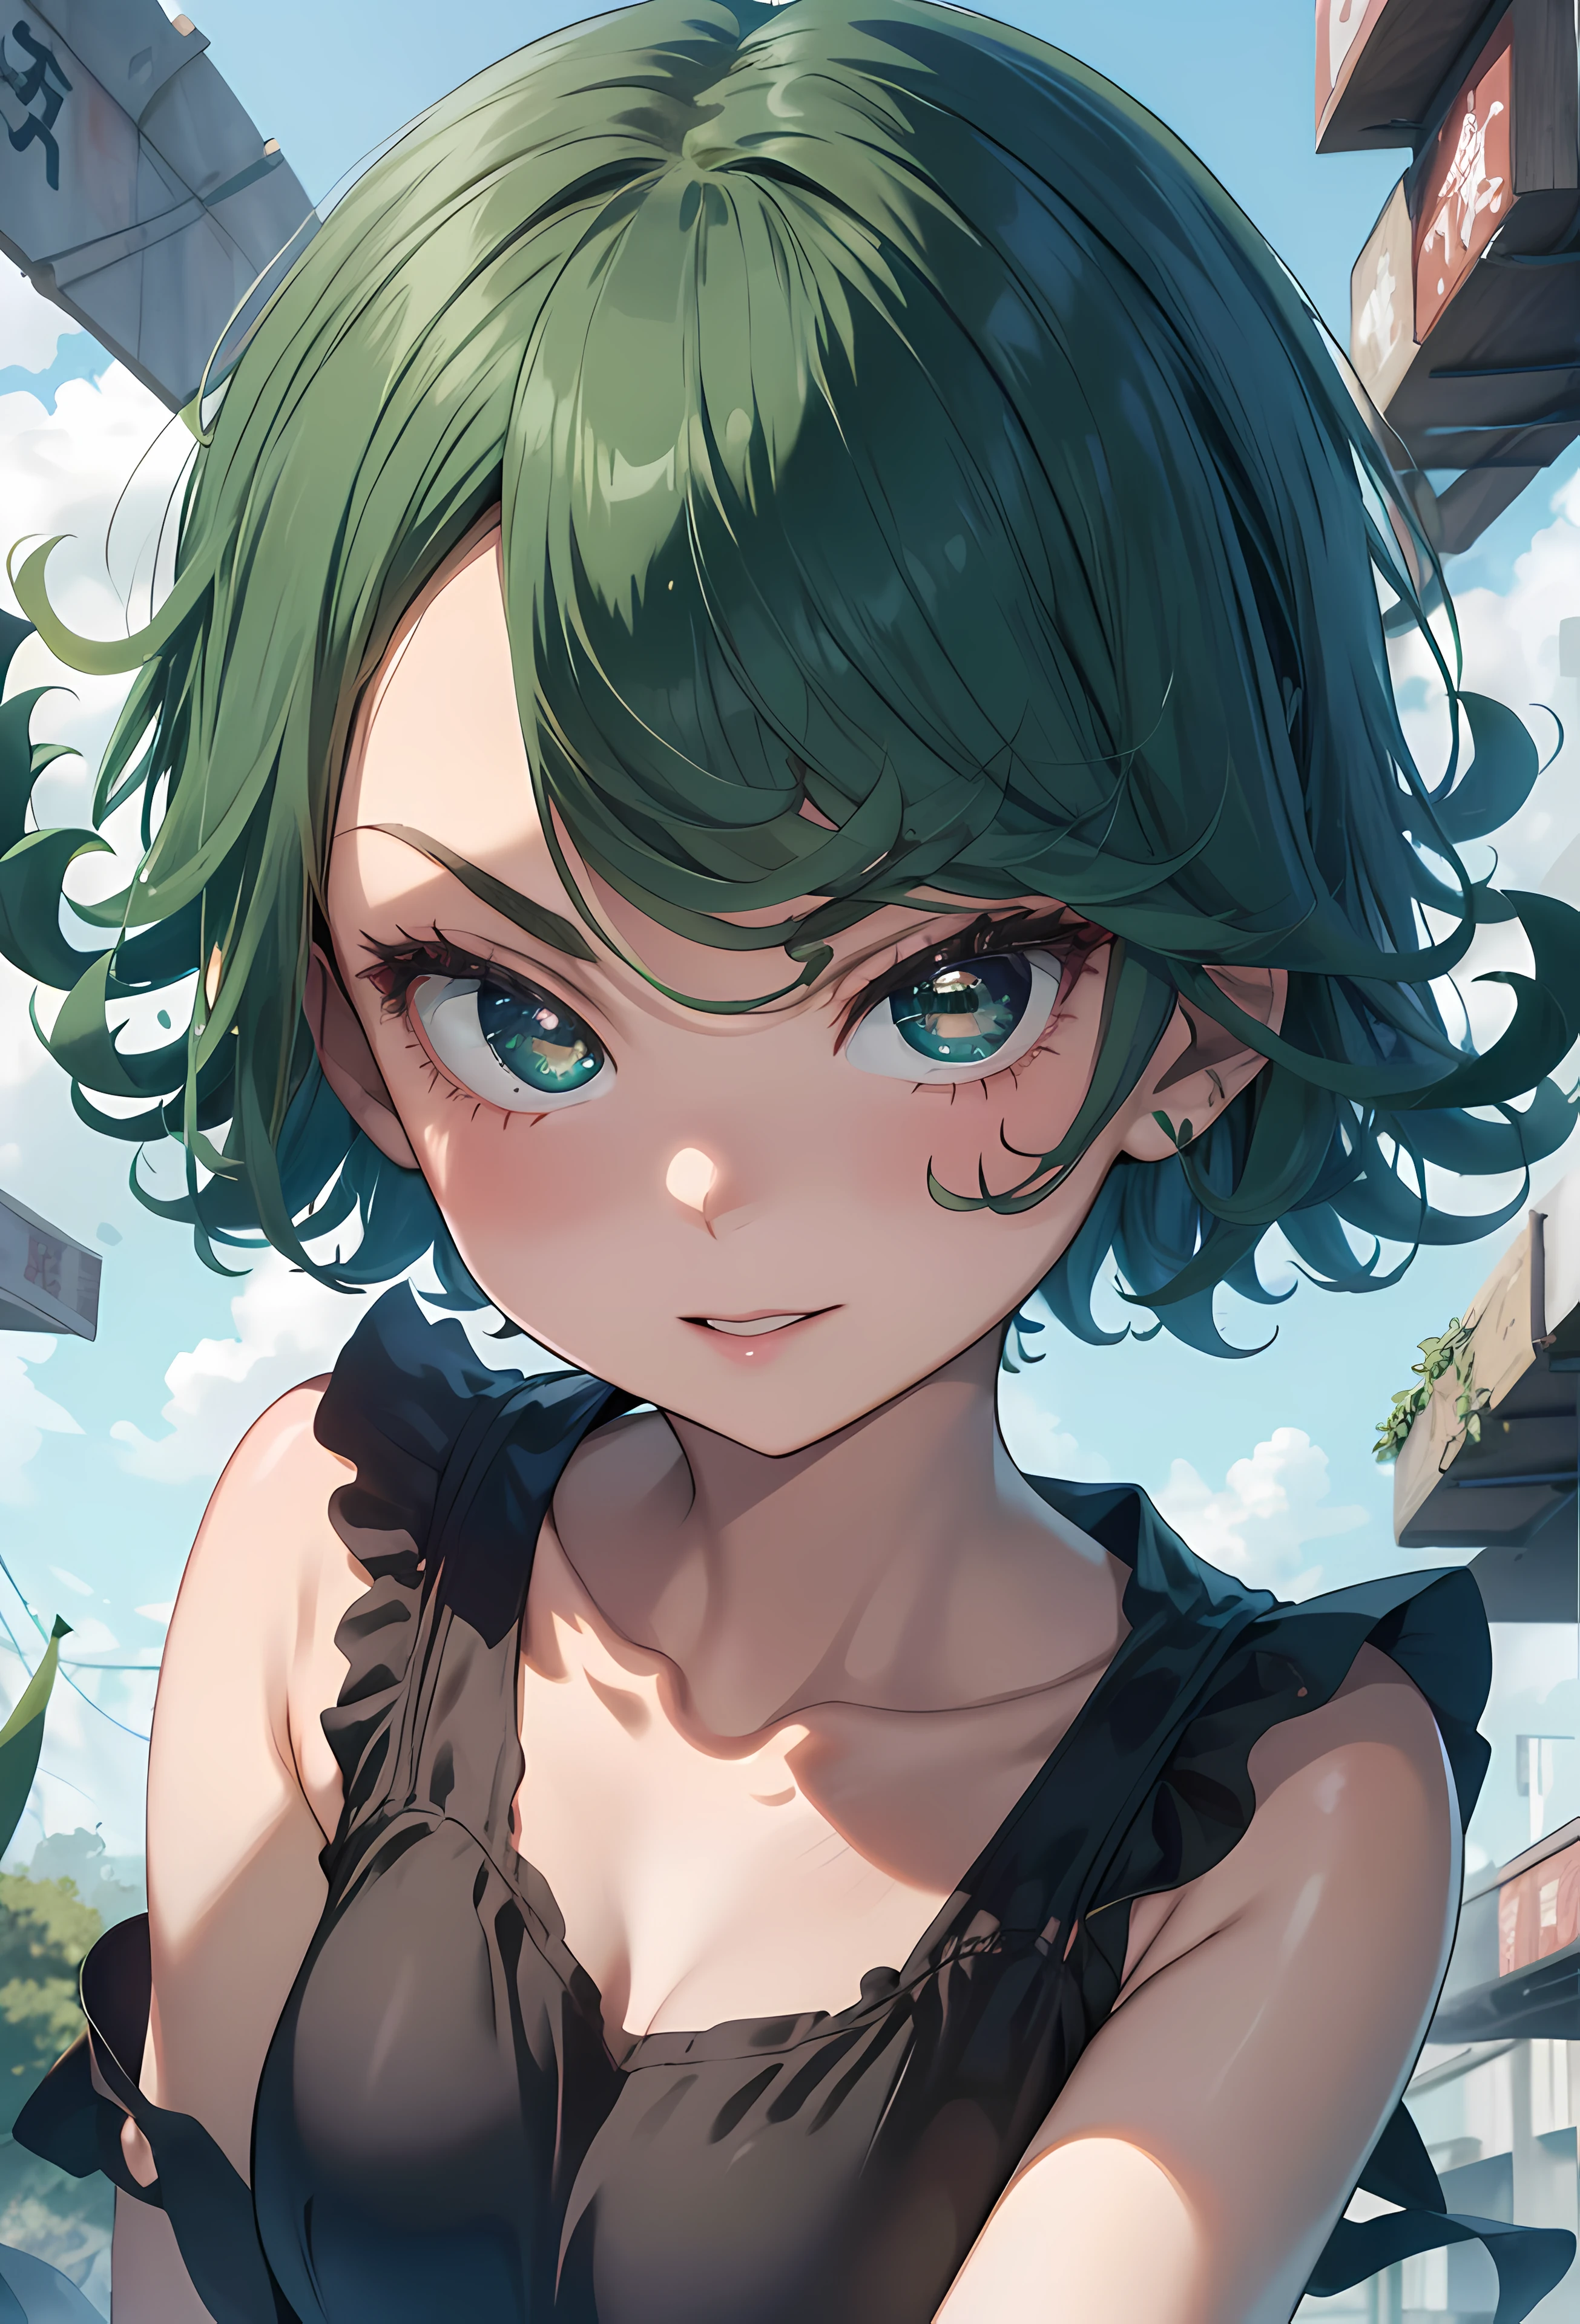 (top-quality, 8K, 12), 1 girl, tatsumaki, Short Hair Hair, Green hair, huge-breasted, , the perfect body, ultra detail face, Detailed lips, Slender eyes, gown, stands, enticing, excited, Convex areola, steam, frombelow